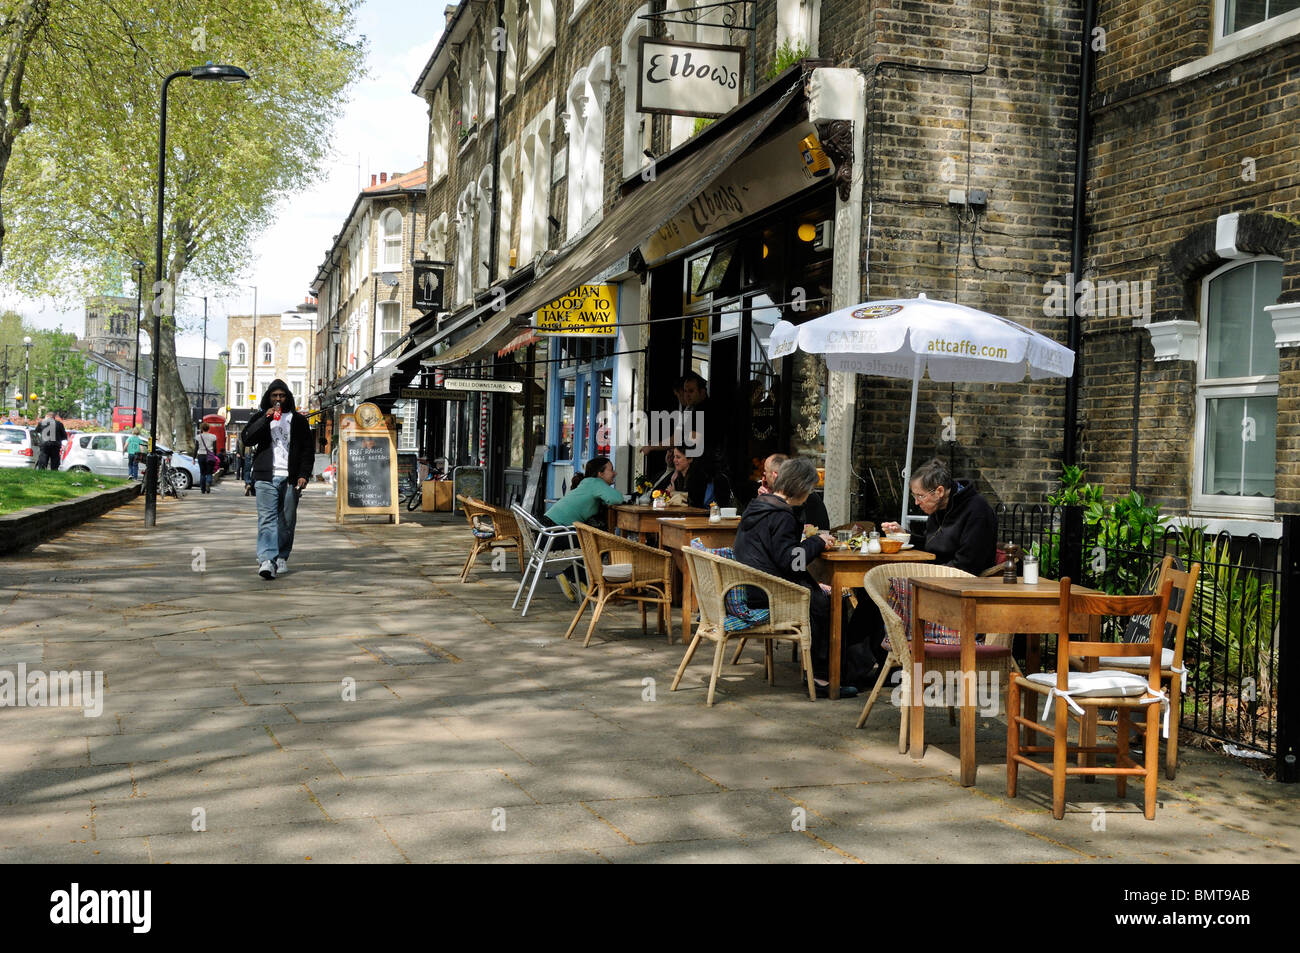 People eating outside Elbows Café in a trendy part of Hackney London England UK Stock Photo